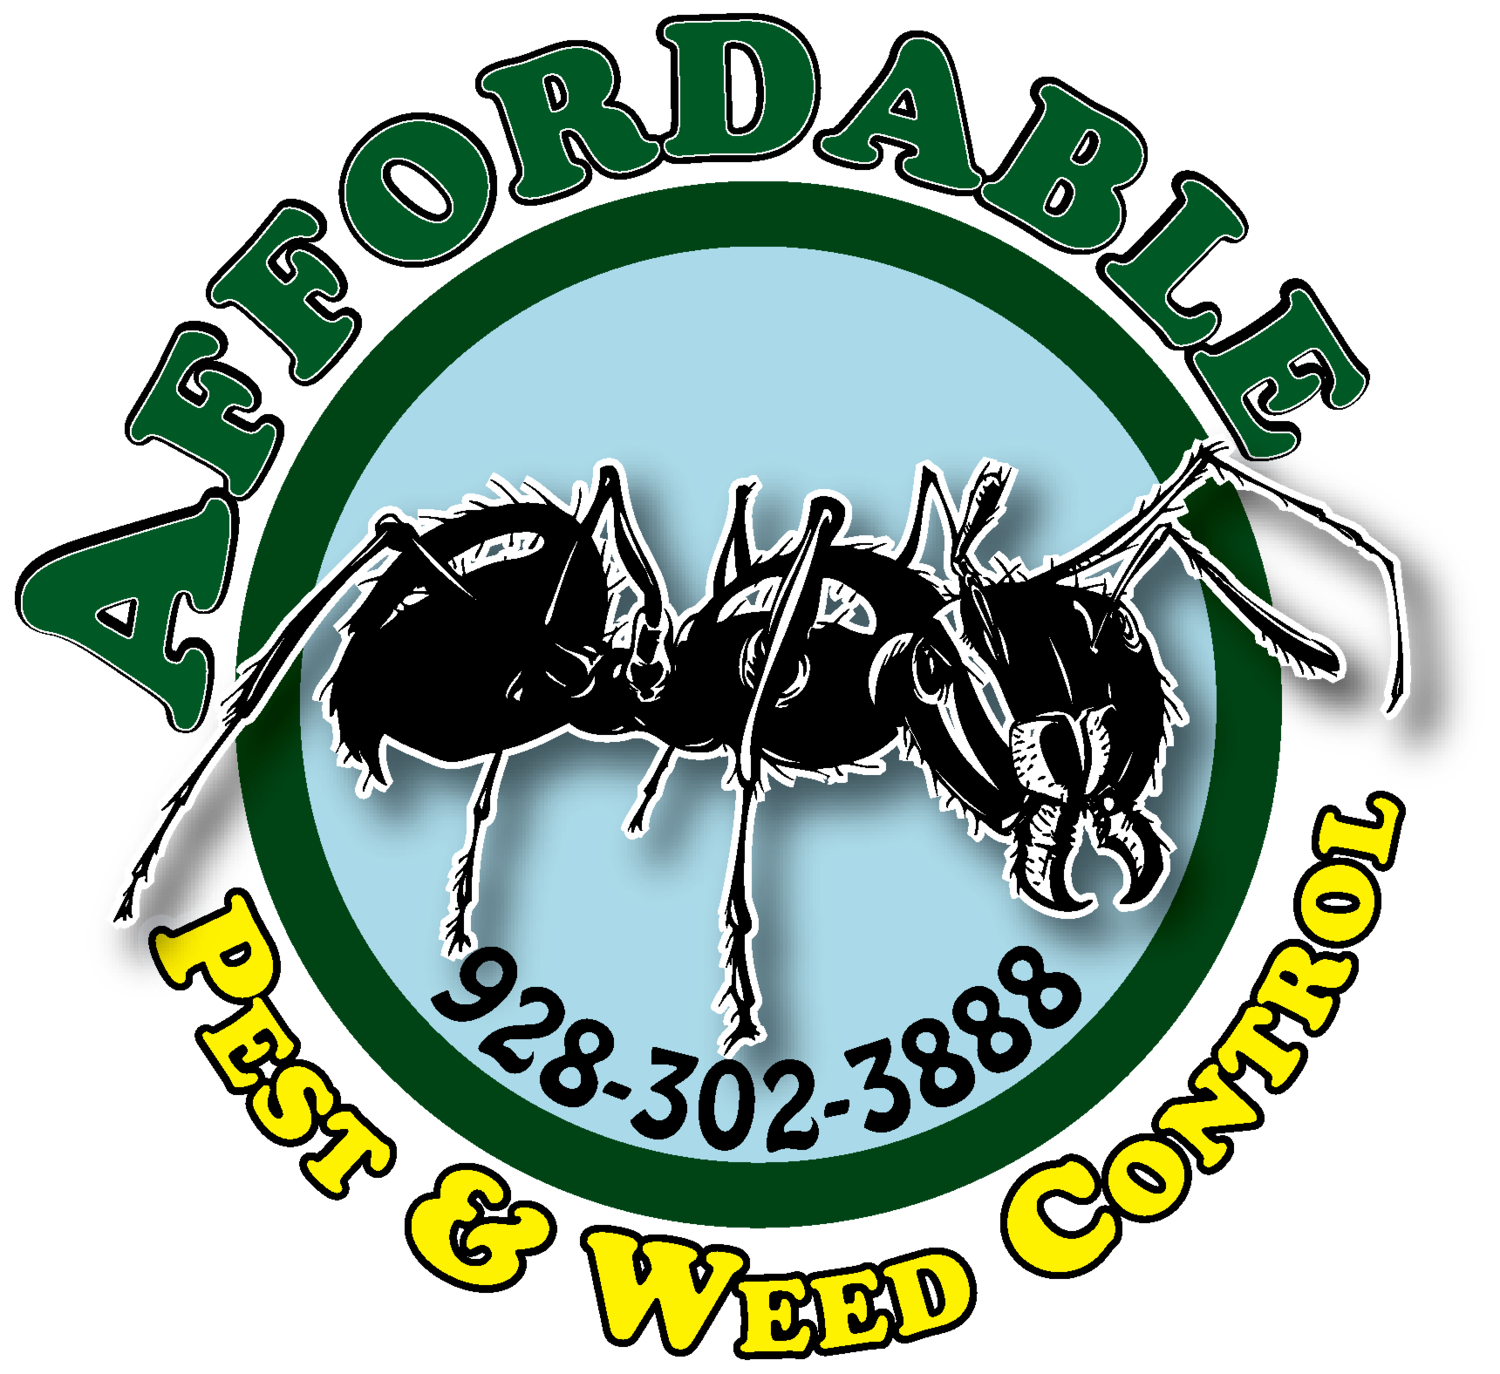 Affordable-Pest-and-Weed-Control-logo.png